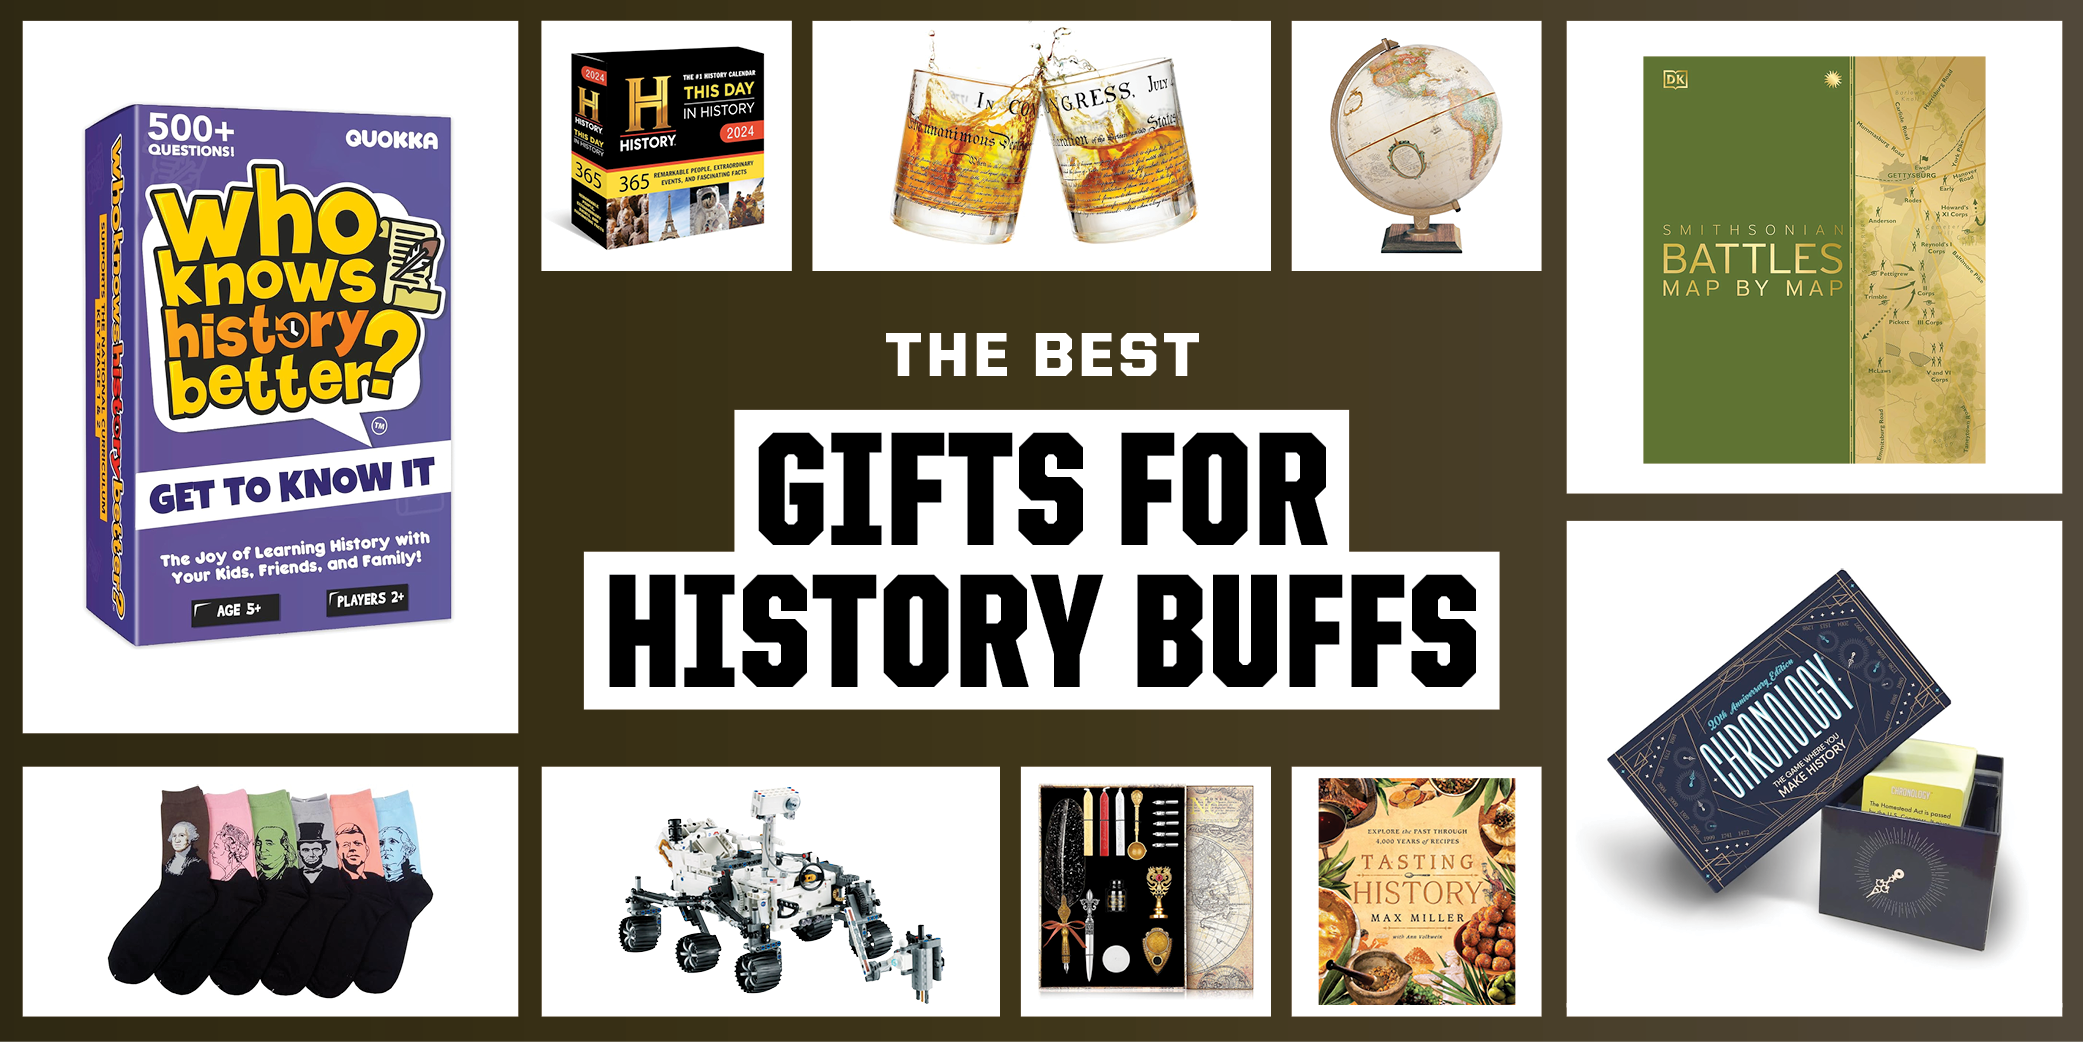 The Best Gifts for History Buffs - Unique Gifts for History Buffs